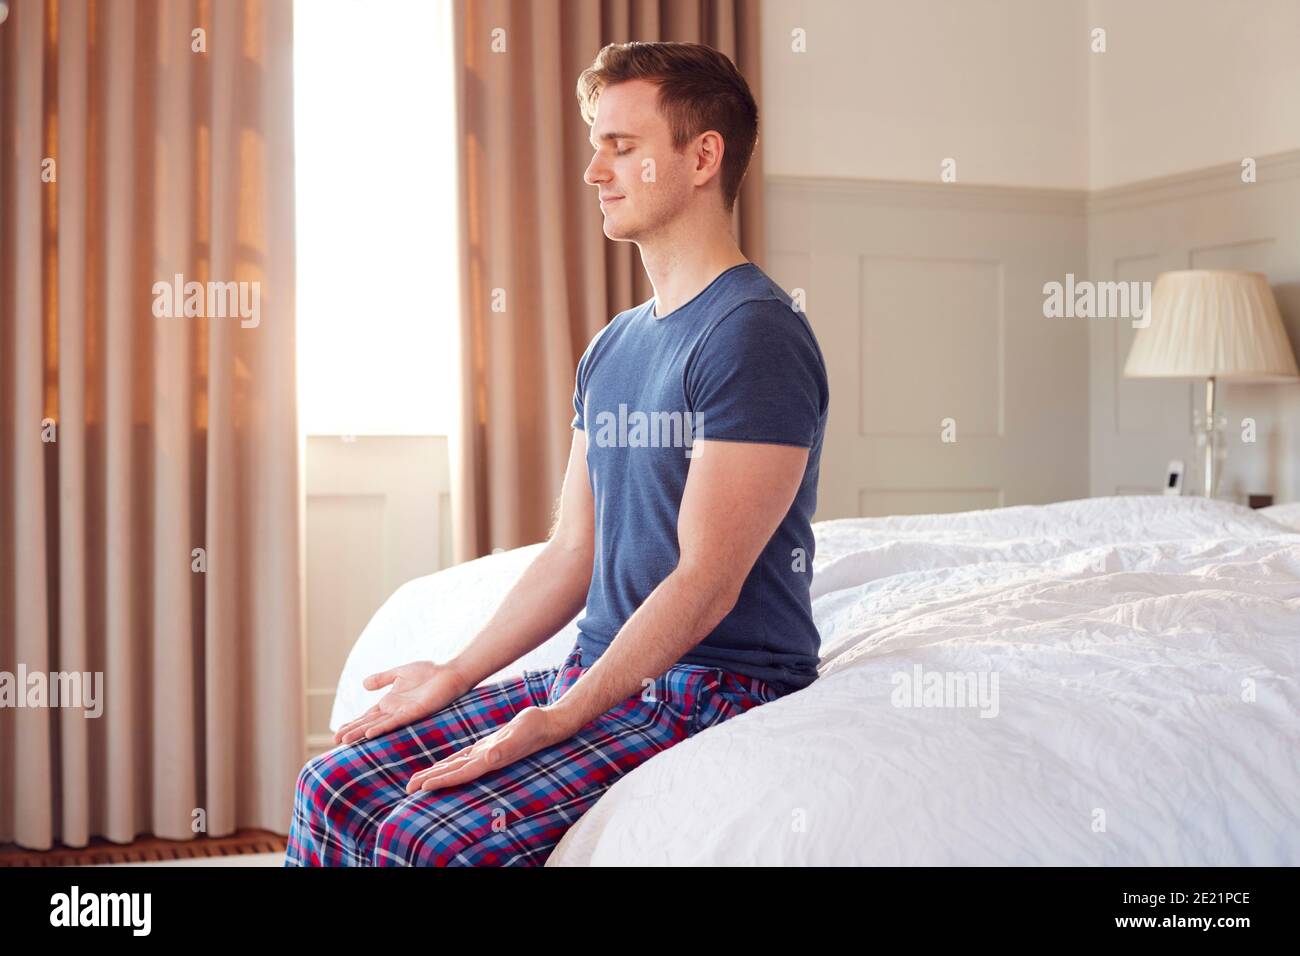 Man Sitting On Edge Of Bed At Home Meditating During Lockdown For Covid-19 Stock Photo